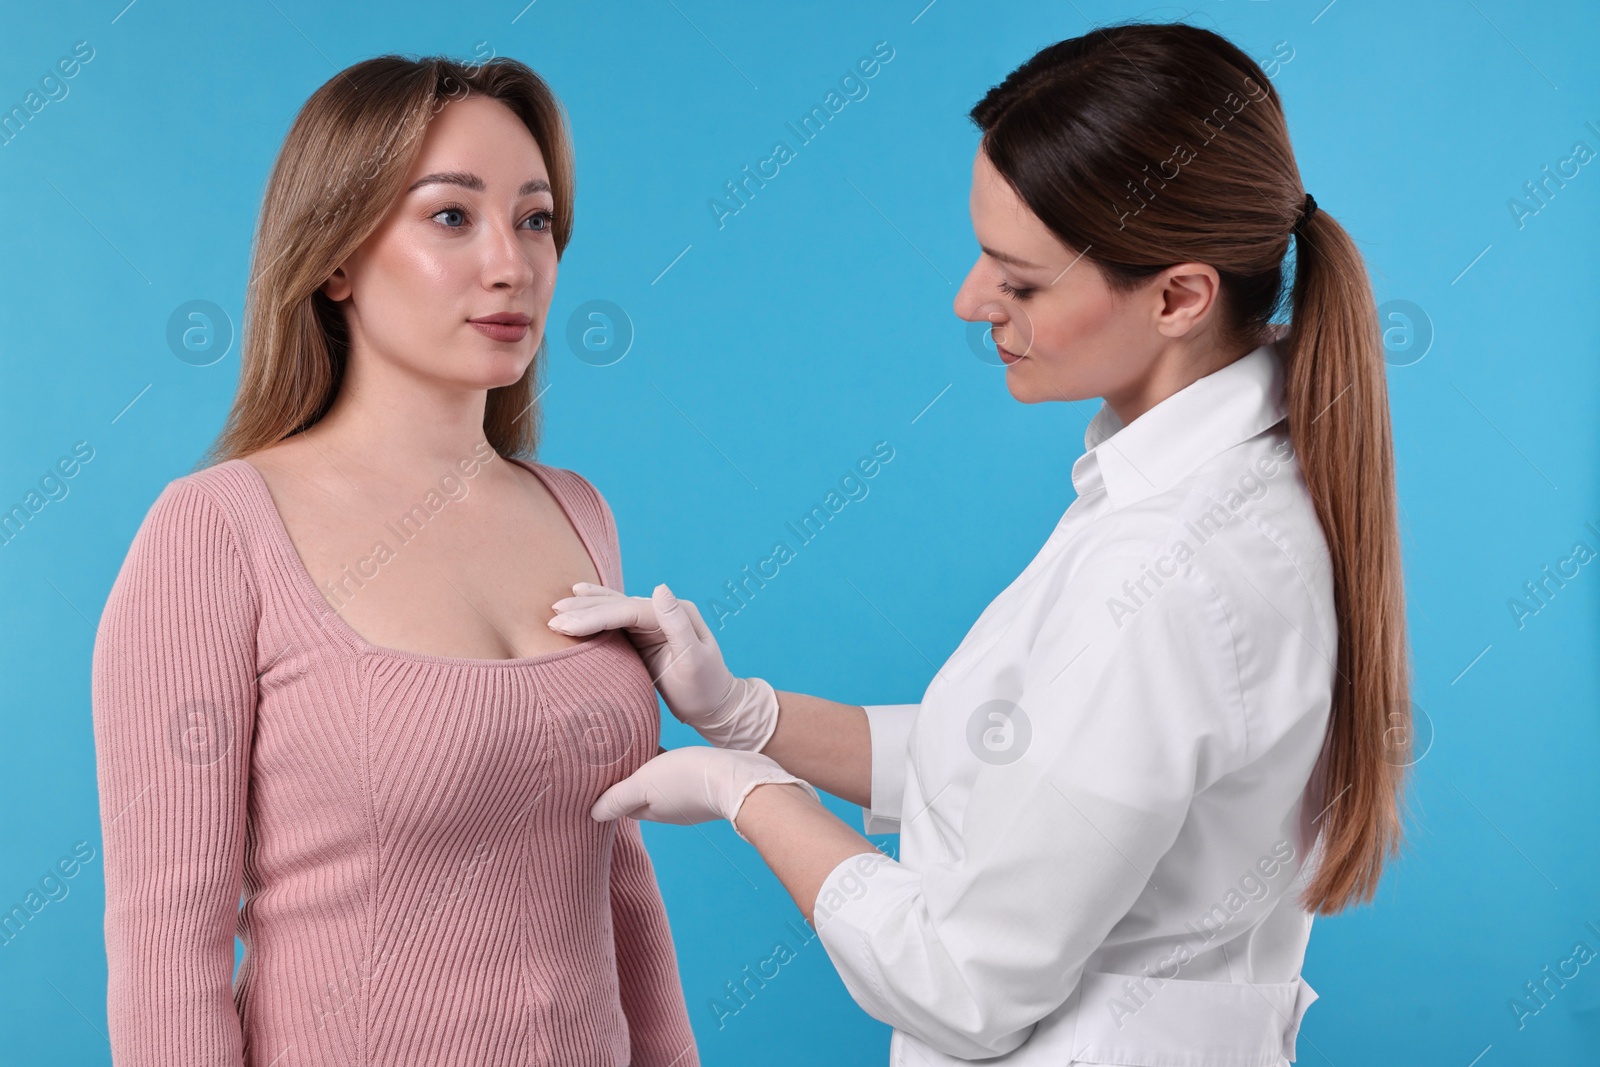 Photo of Mammologist checking woman's breast on light blue background